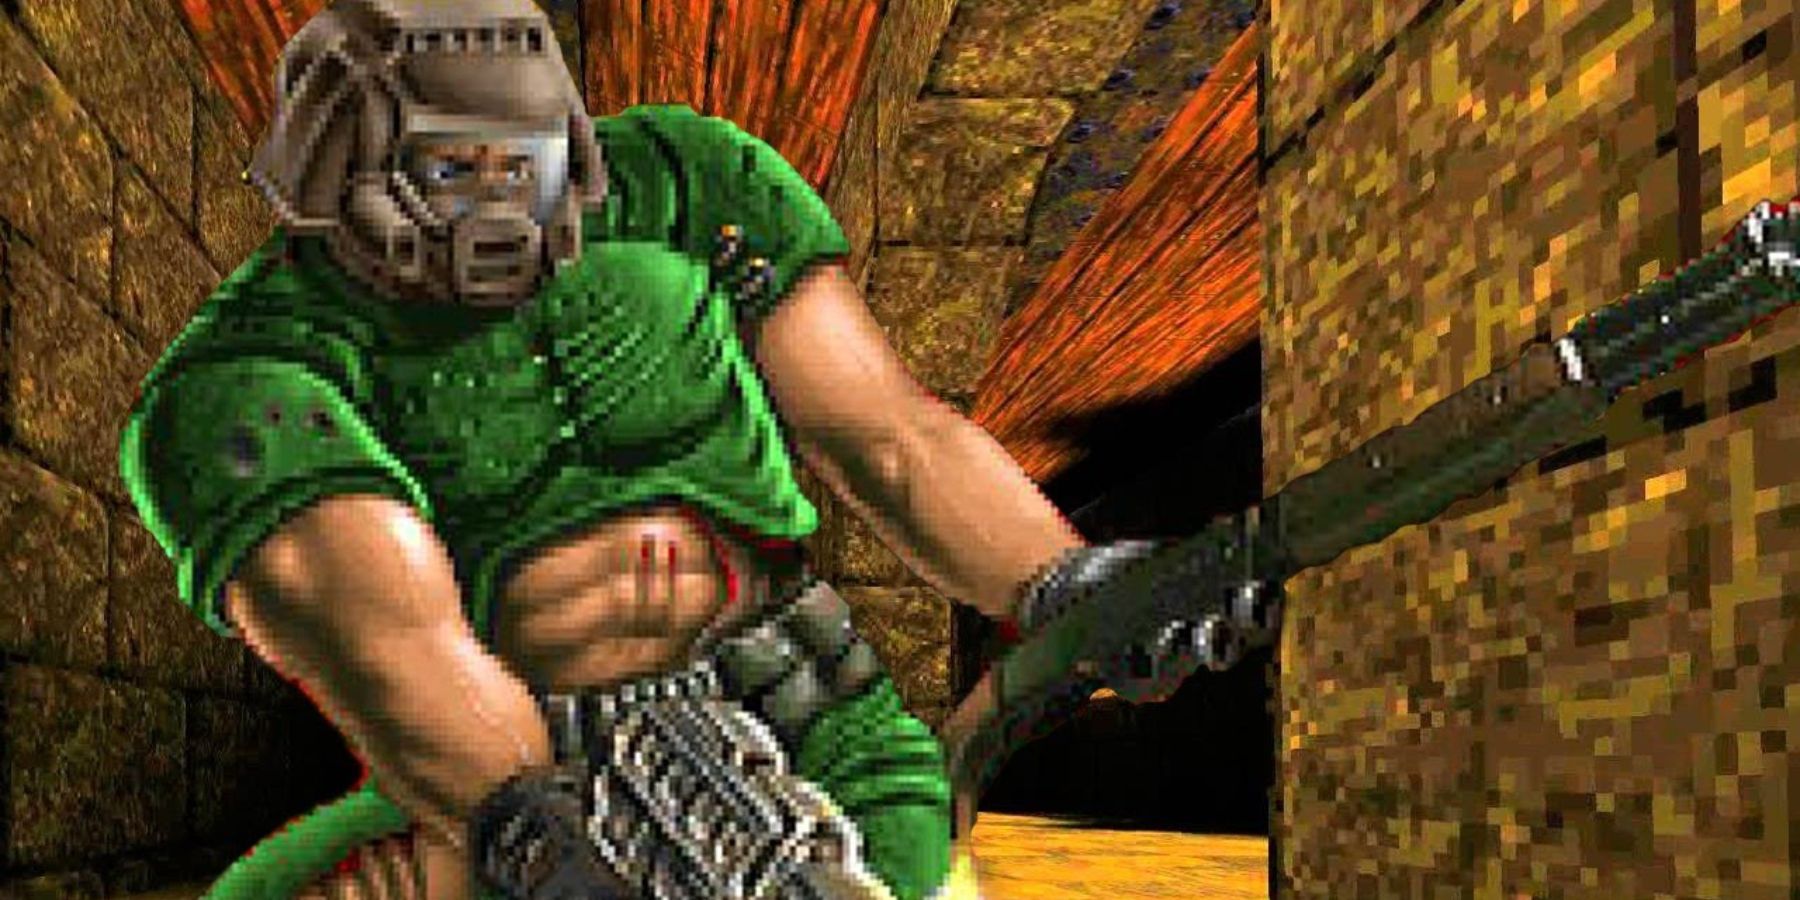 An image showing Doom Guy with a background from a Quake level.